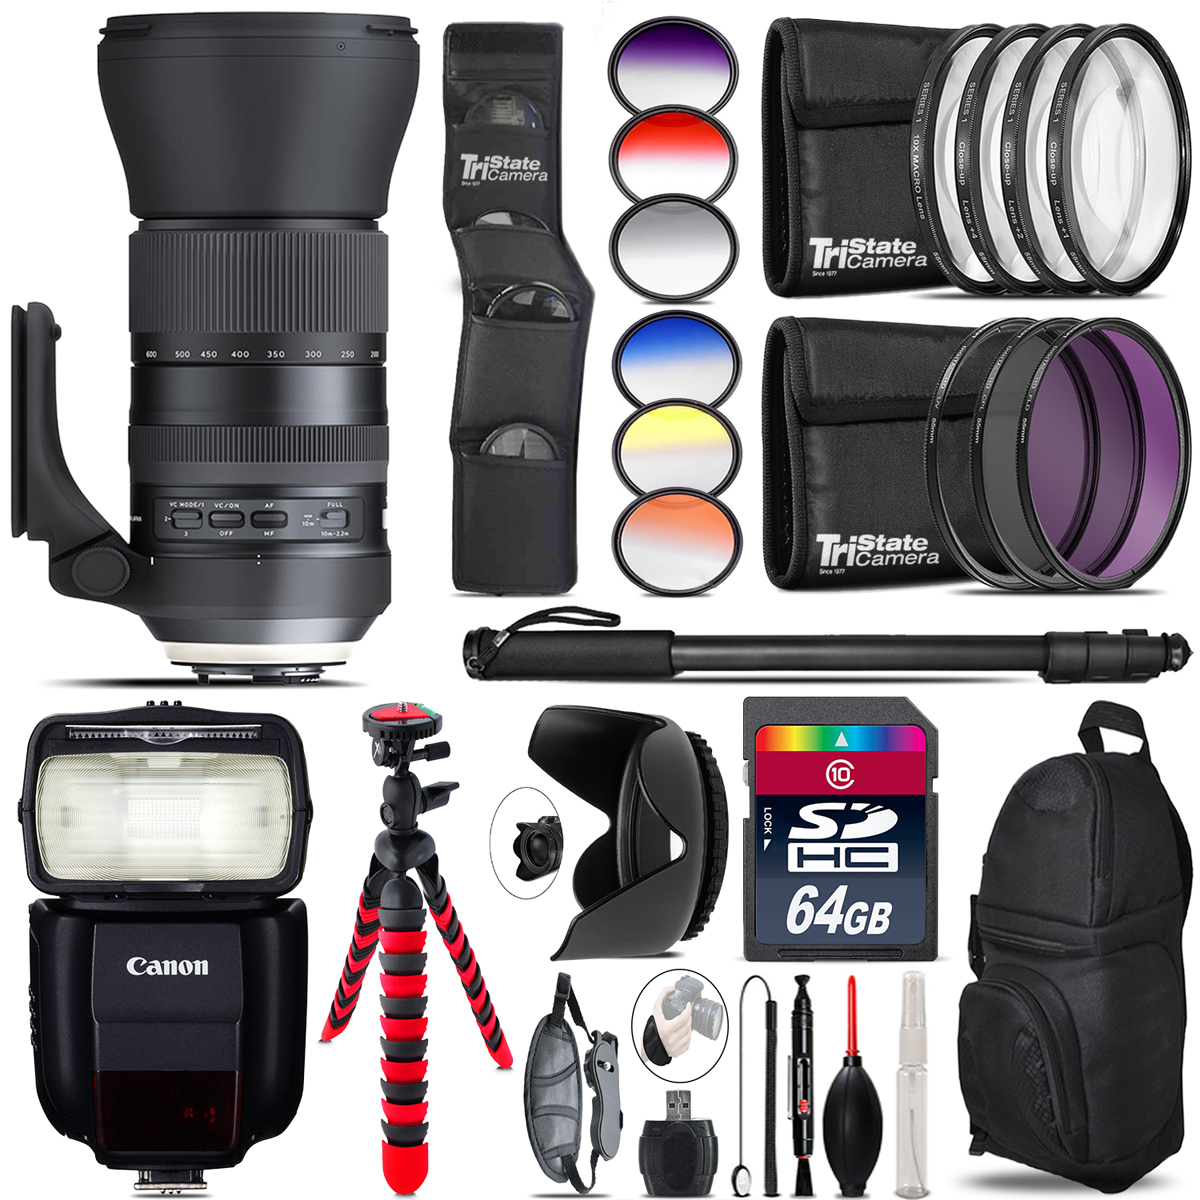 Tamron 150-600mm G2 for Canon + Speedlite 430EX III-RT - 64GB Accessory Kit *FREE SHIPPING*